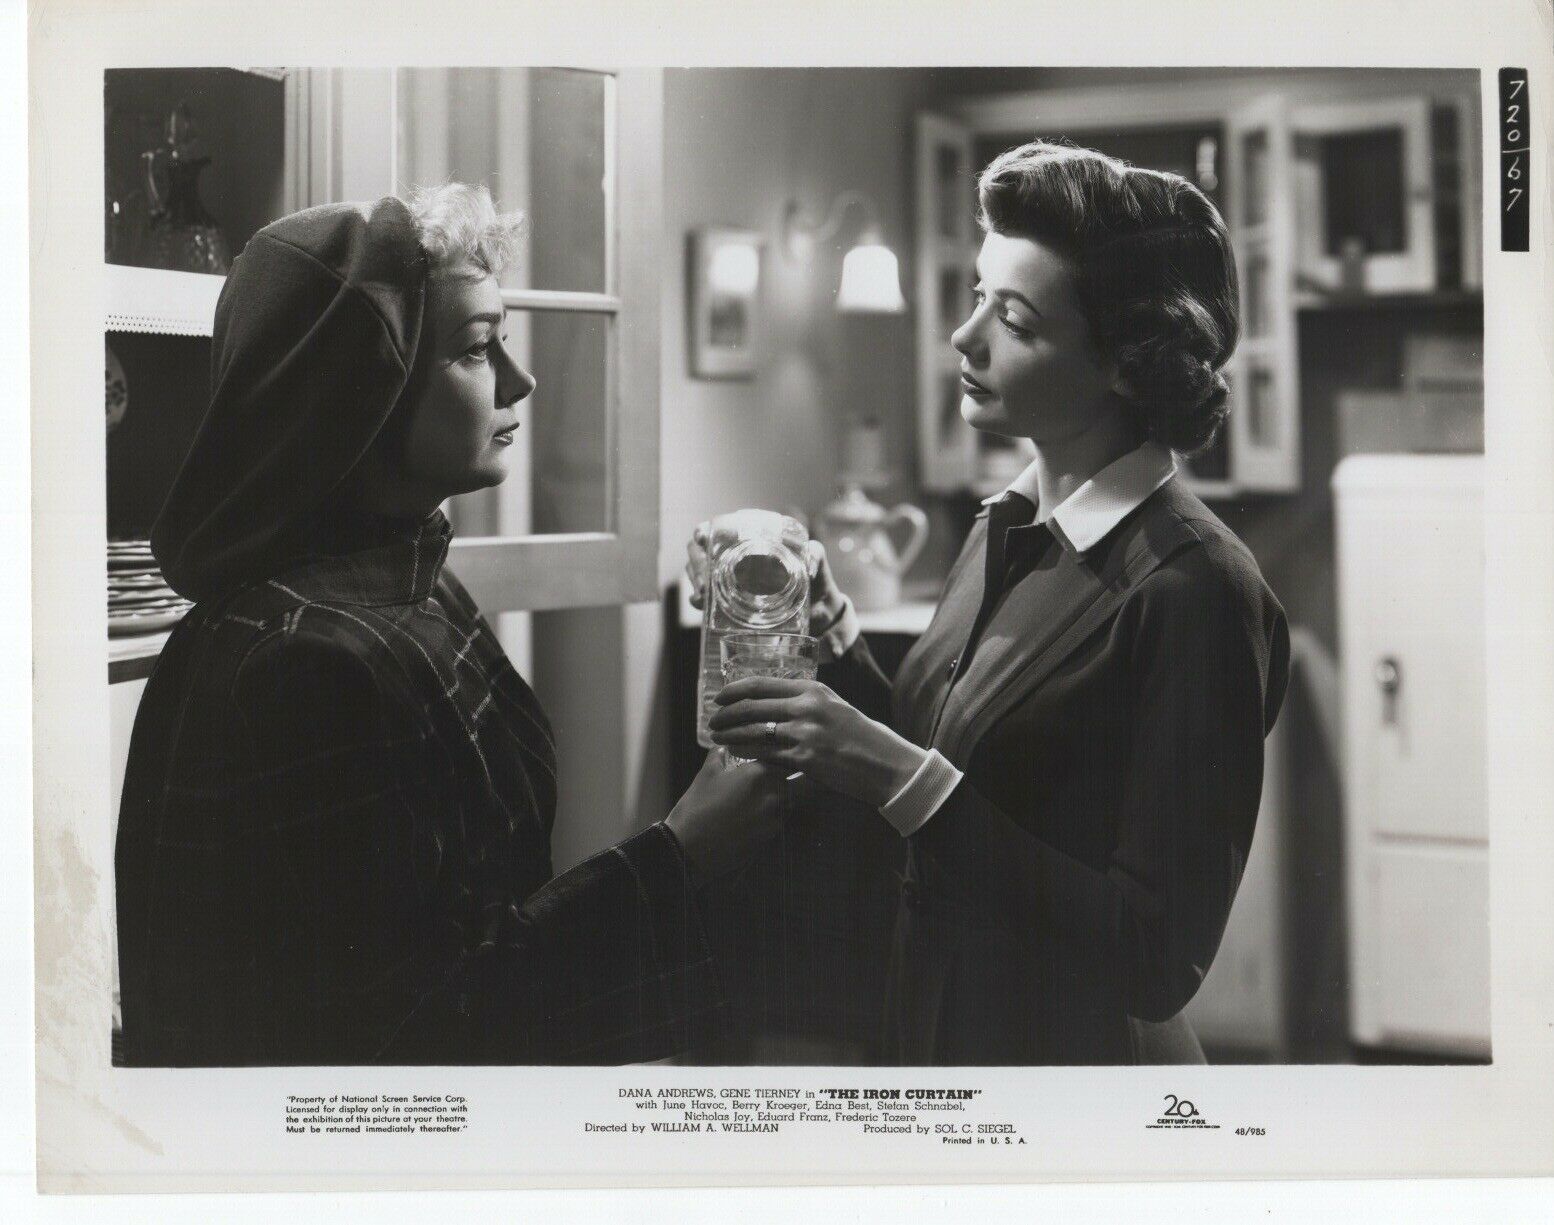 Primary image for GENE TIERNEY June Havoc THE IRON CURTAIN - PROMOTIONAL STILL Original PHOTO